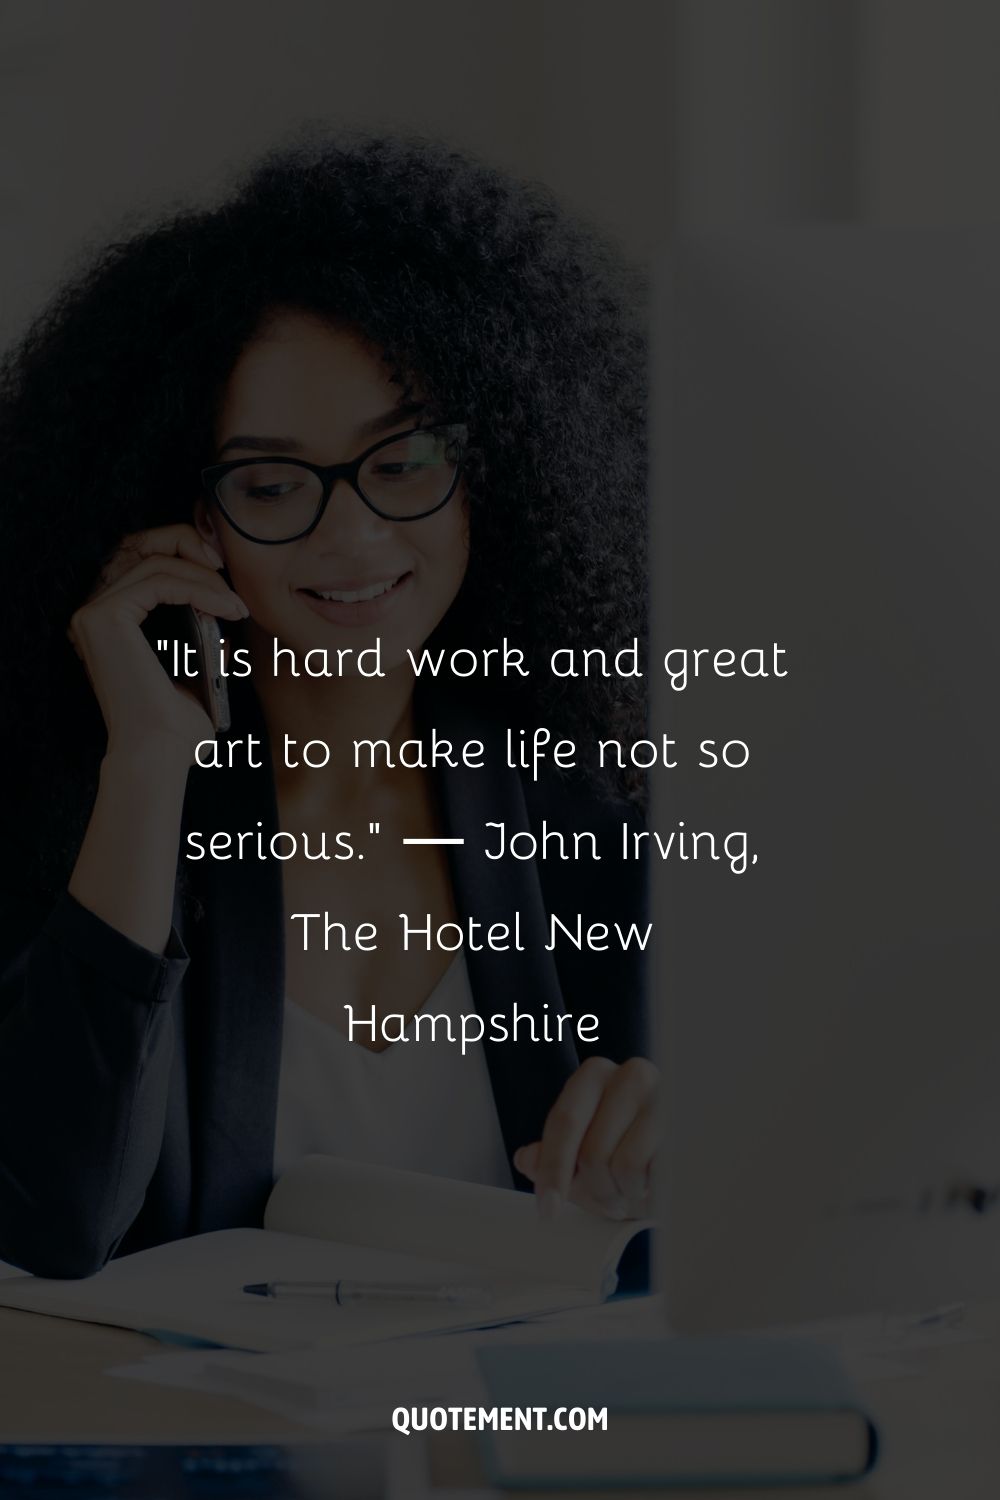 “It is hard work and great art to make life not so serious.” ― John Irving, The Hotel New Hampshire